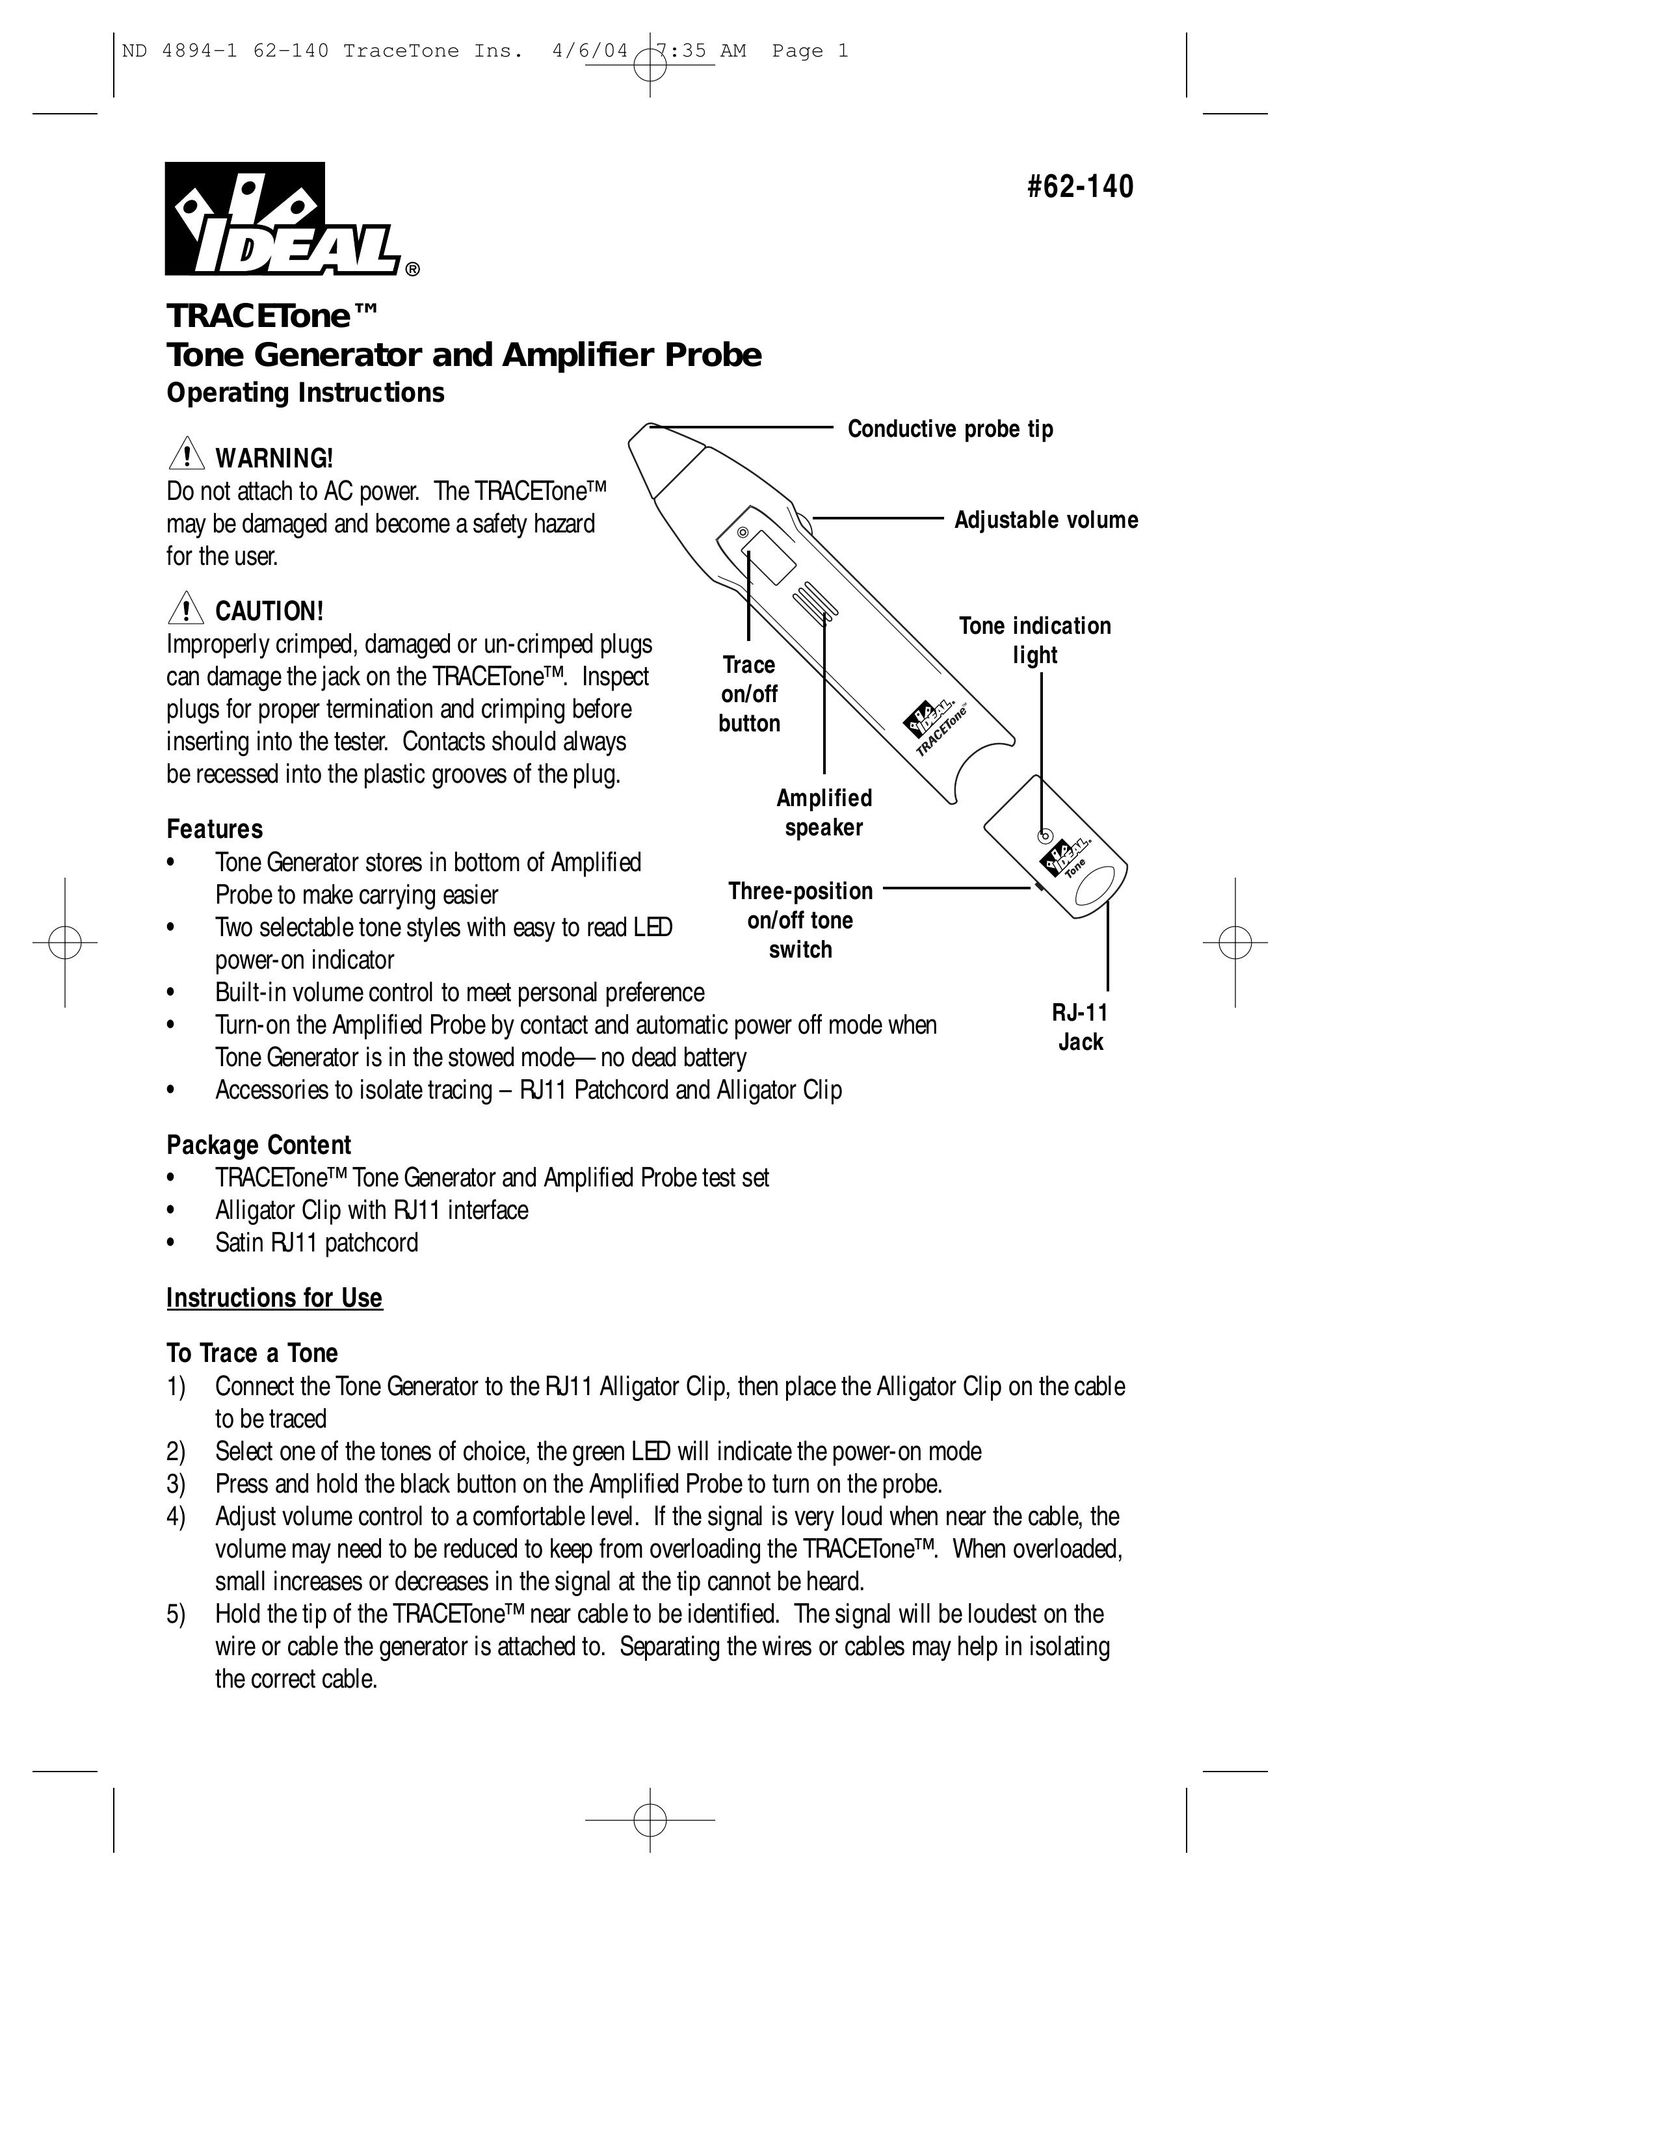 IDEAL INDUSTRIES 62-140 Car Amplifier User Manual (Page 1)